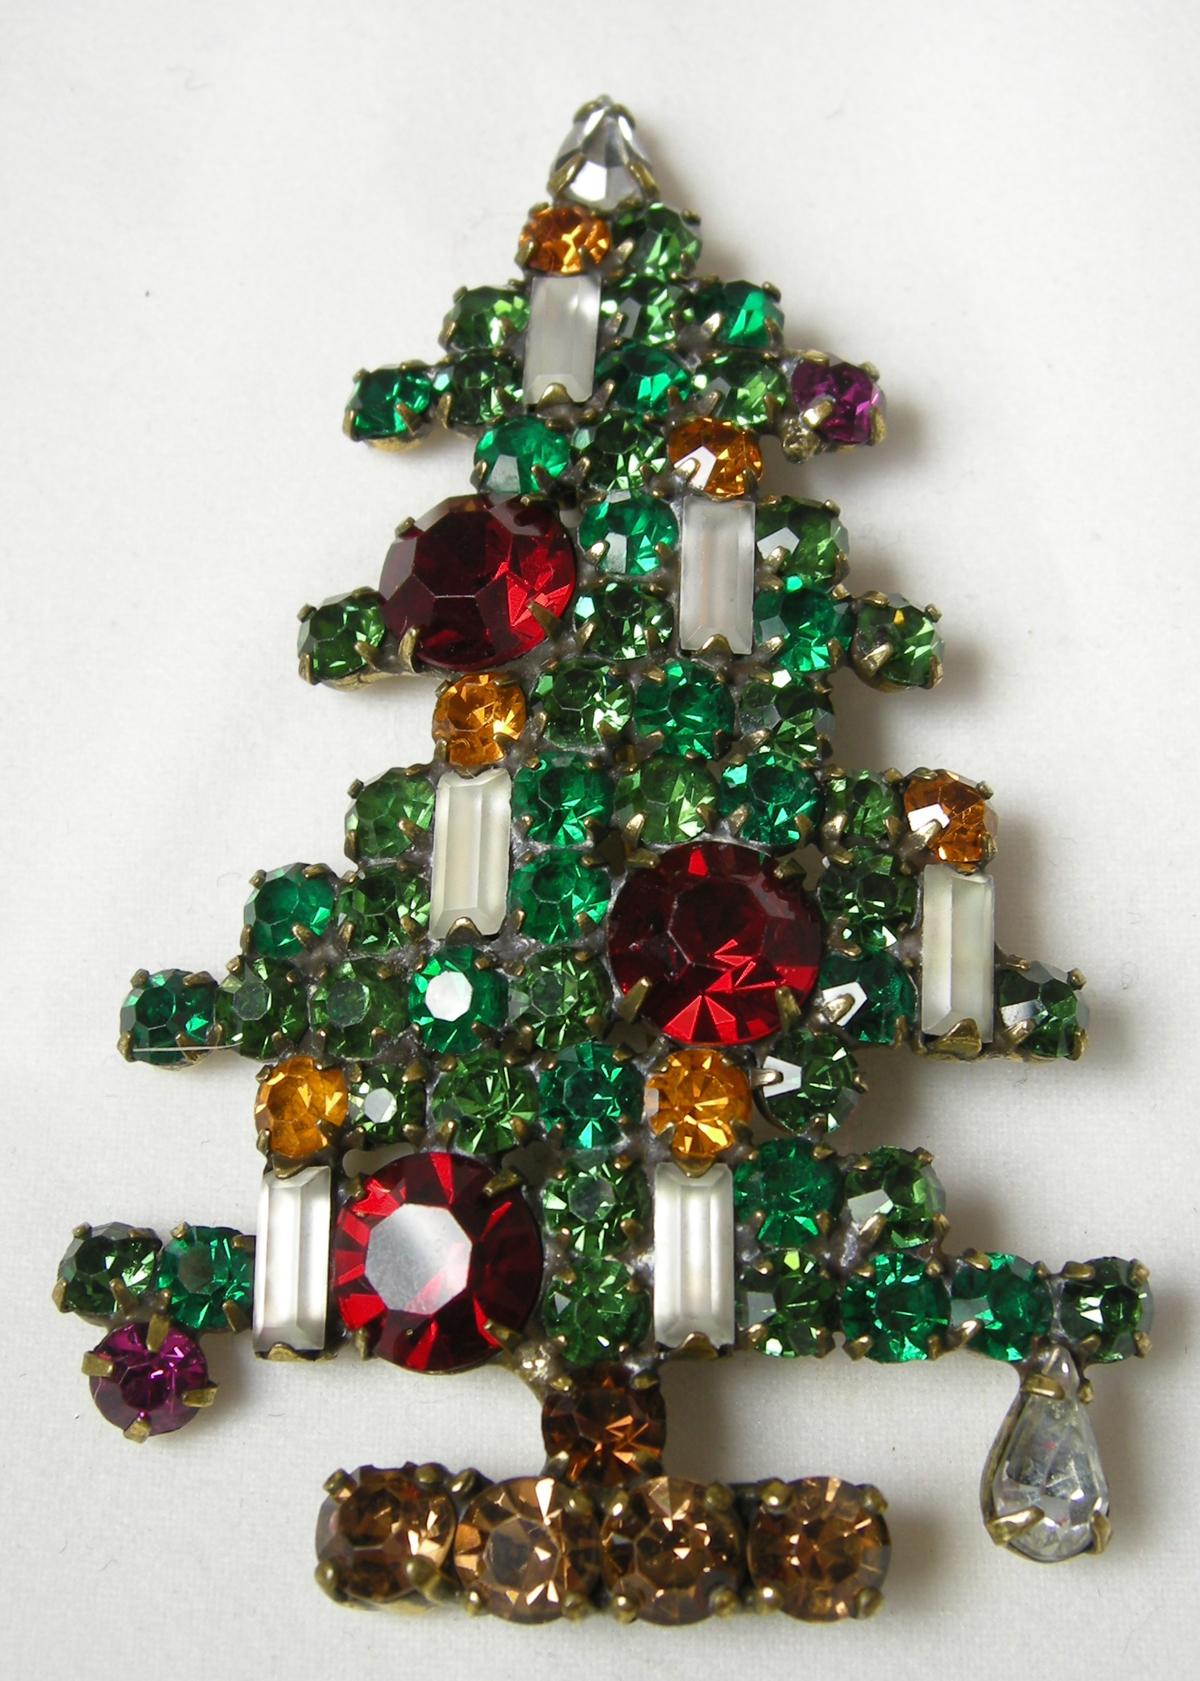 This large vintage signed Weiss Christmas tree brooch five candles amidst multi-color crystals in a gold tone setting. In excellent condition, this brooch measures 2-7/8” x 1-3/4” and is signed “Weiss”.